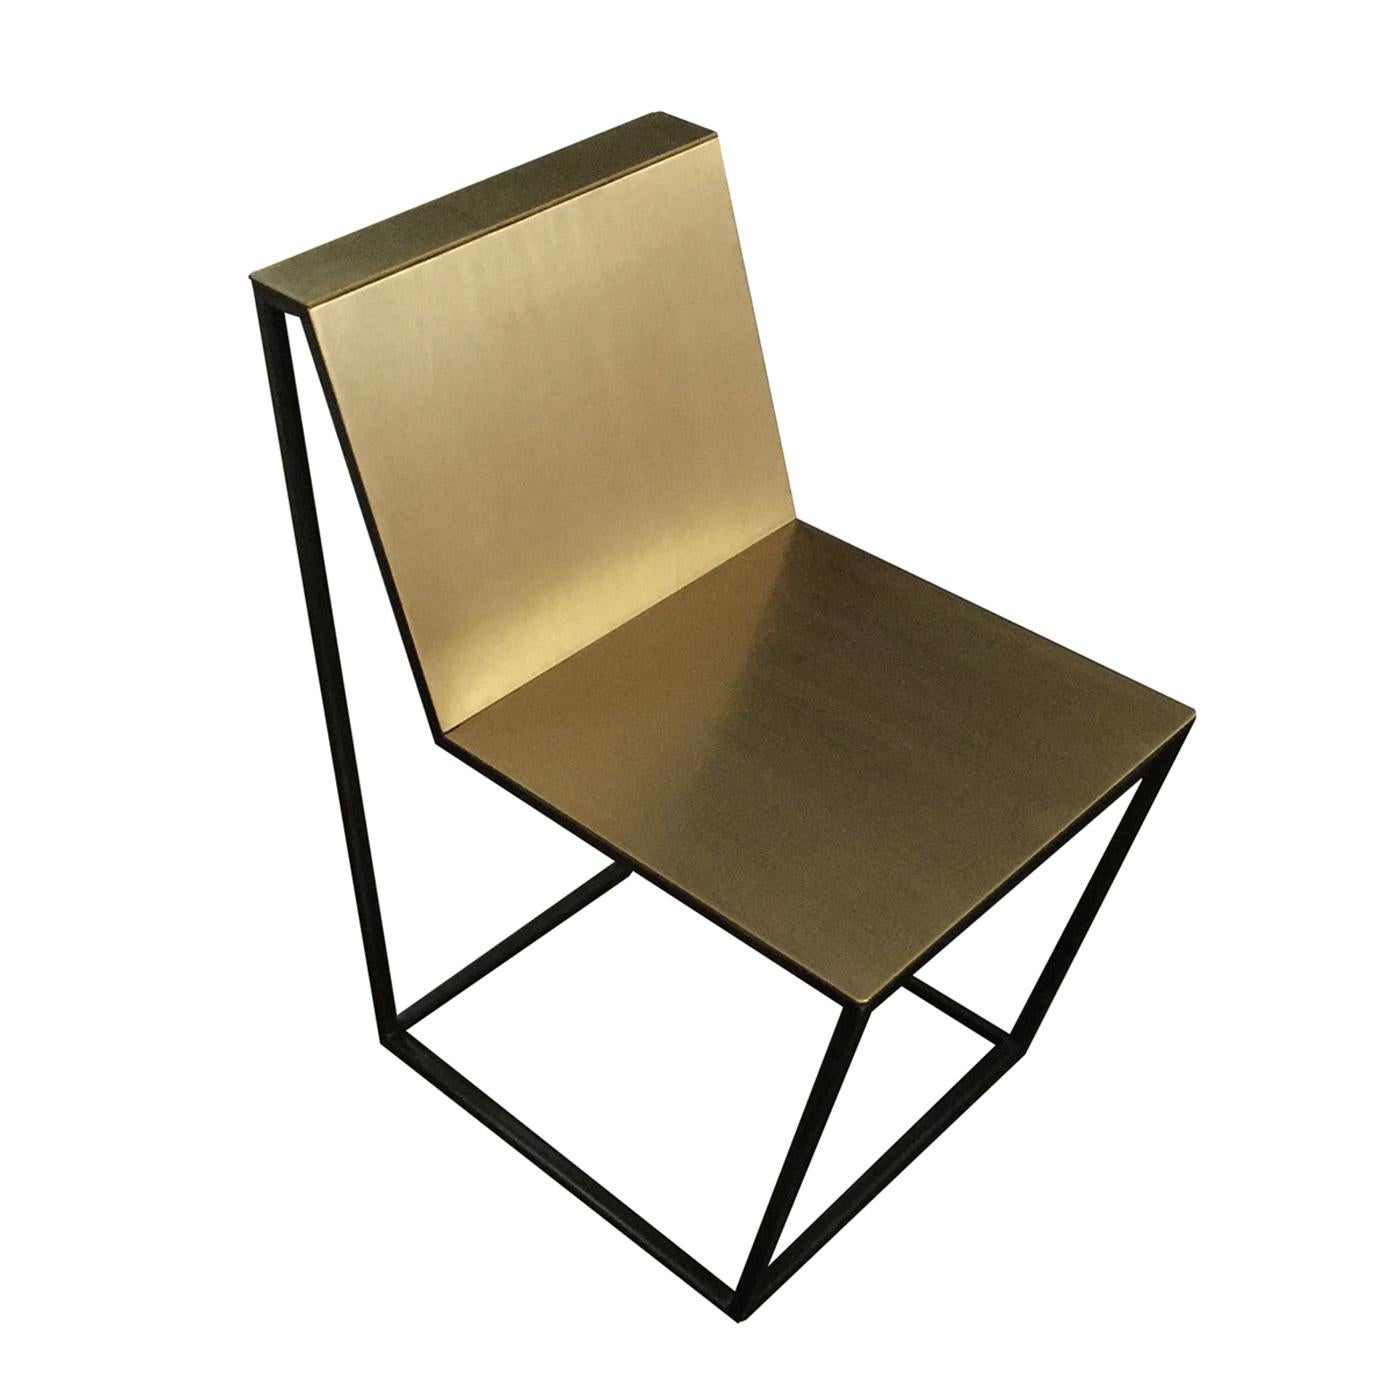 Part of the forma frame series, this chair is entirely made in brass, whose warm hues reflect the surrounding light creating striking effects. The structure is in brass with a square section that forms the shape of a square at the base, enlarging